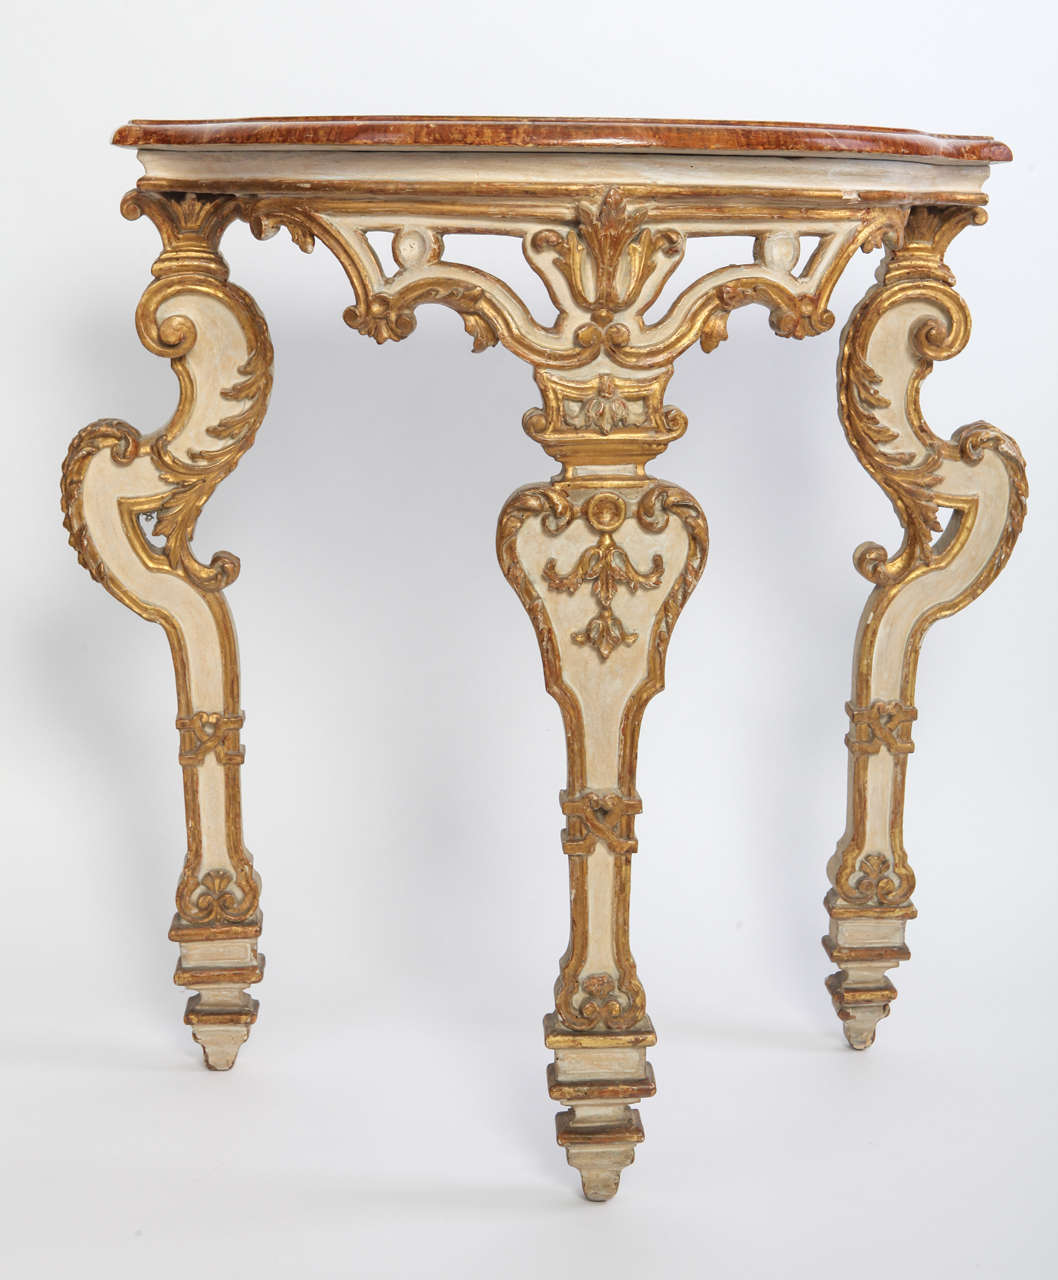 Pair of Italian 18th Century Painted and Parcel-Gilt Console Tables (Barock)